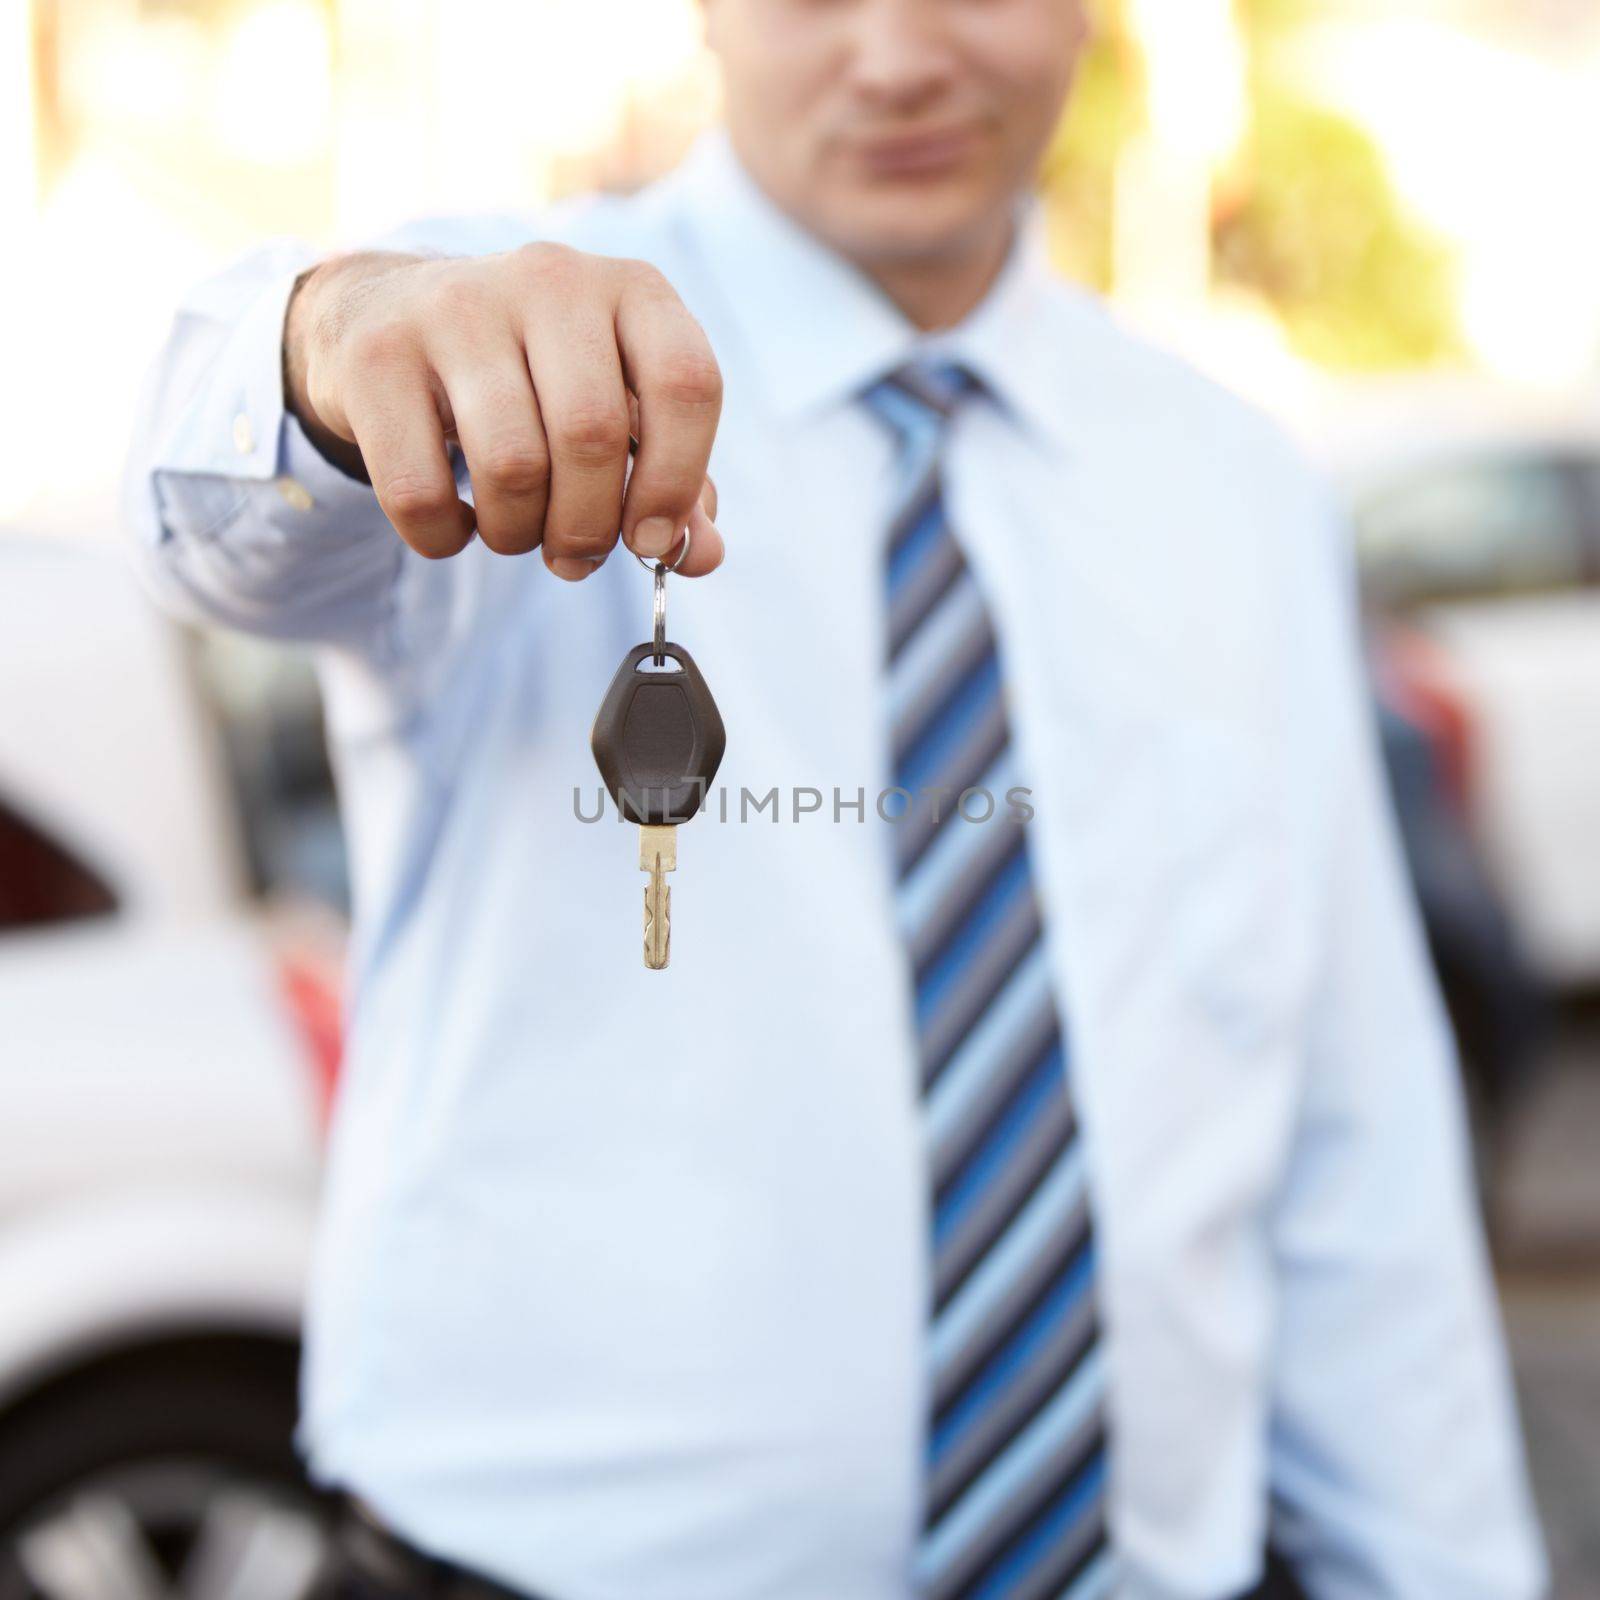 The key to your new ride. Cropped image a mans hand holding a car key